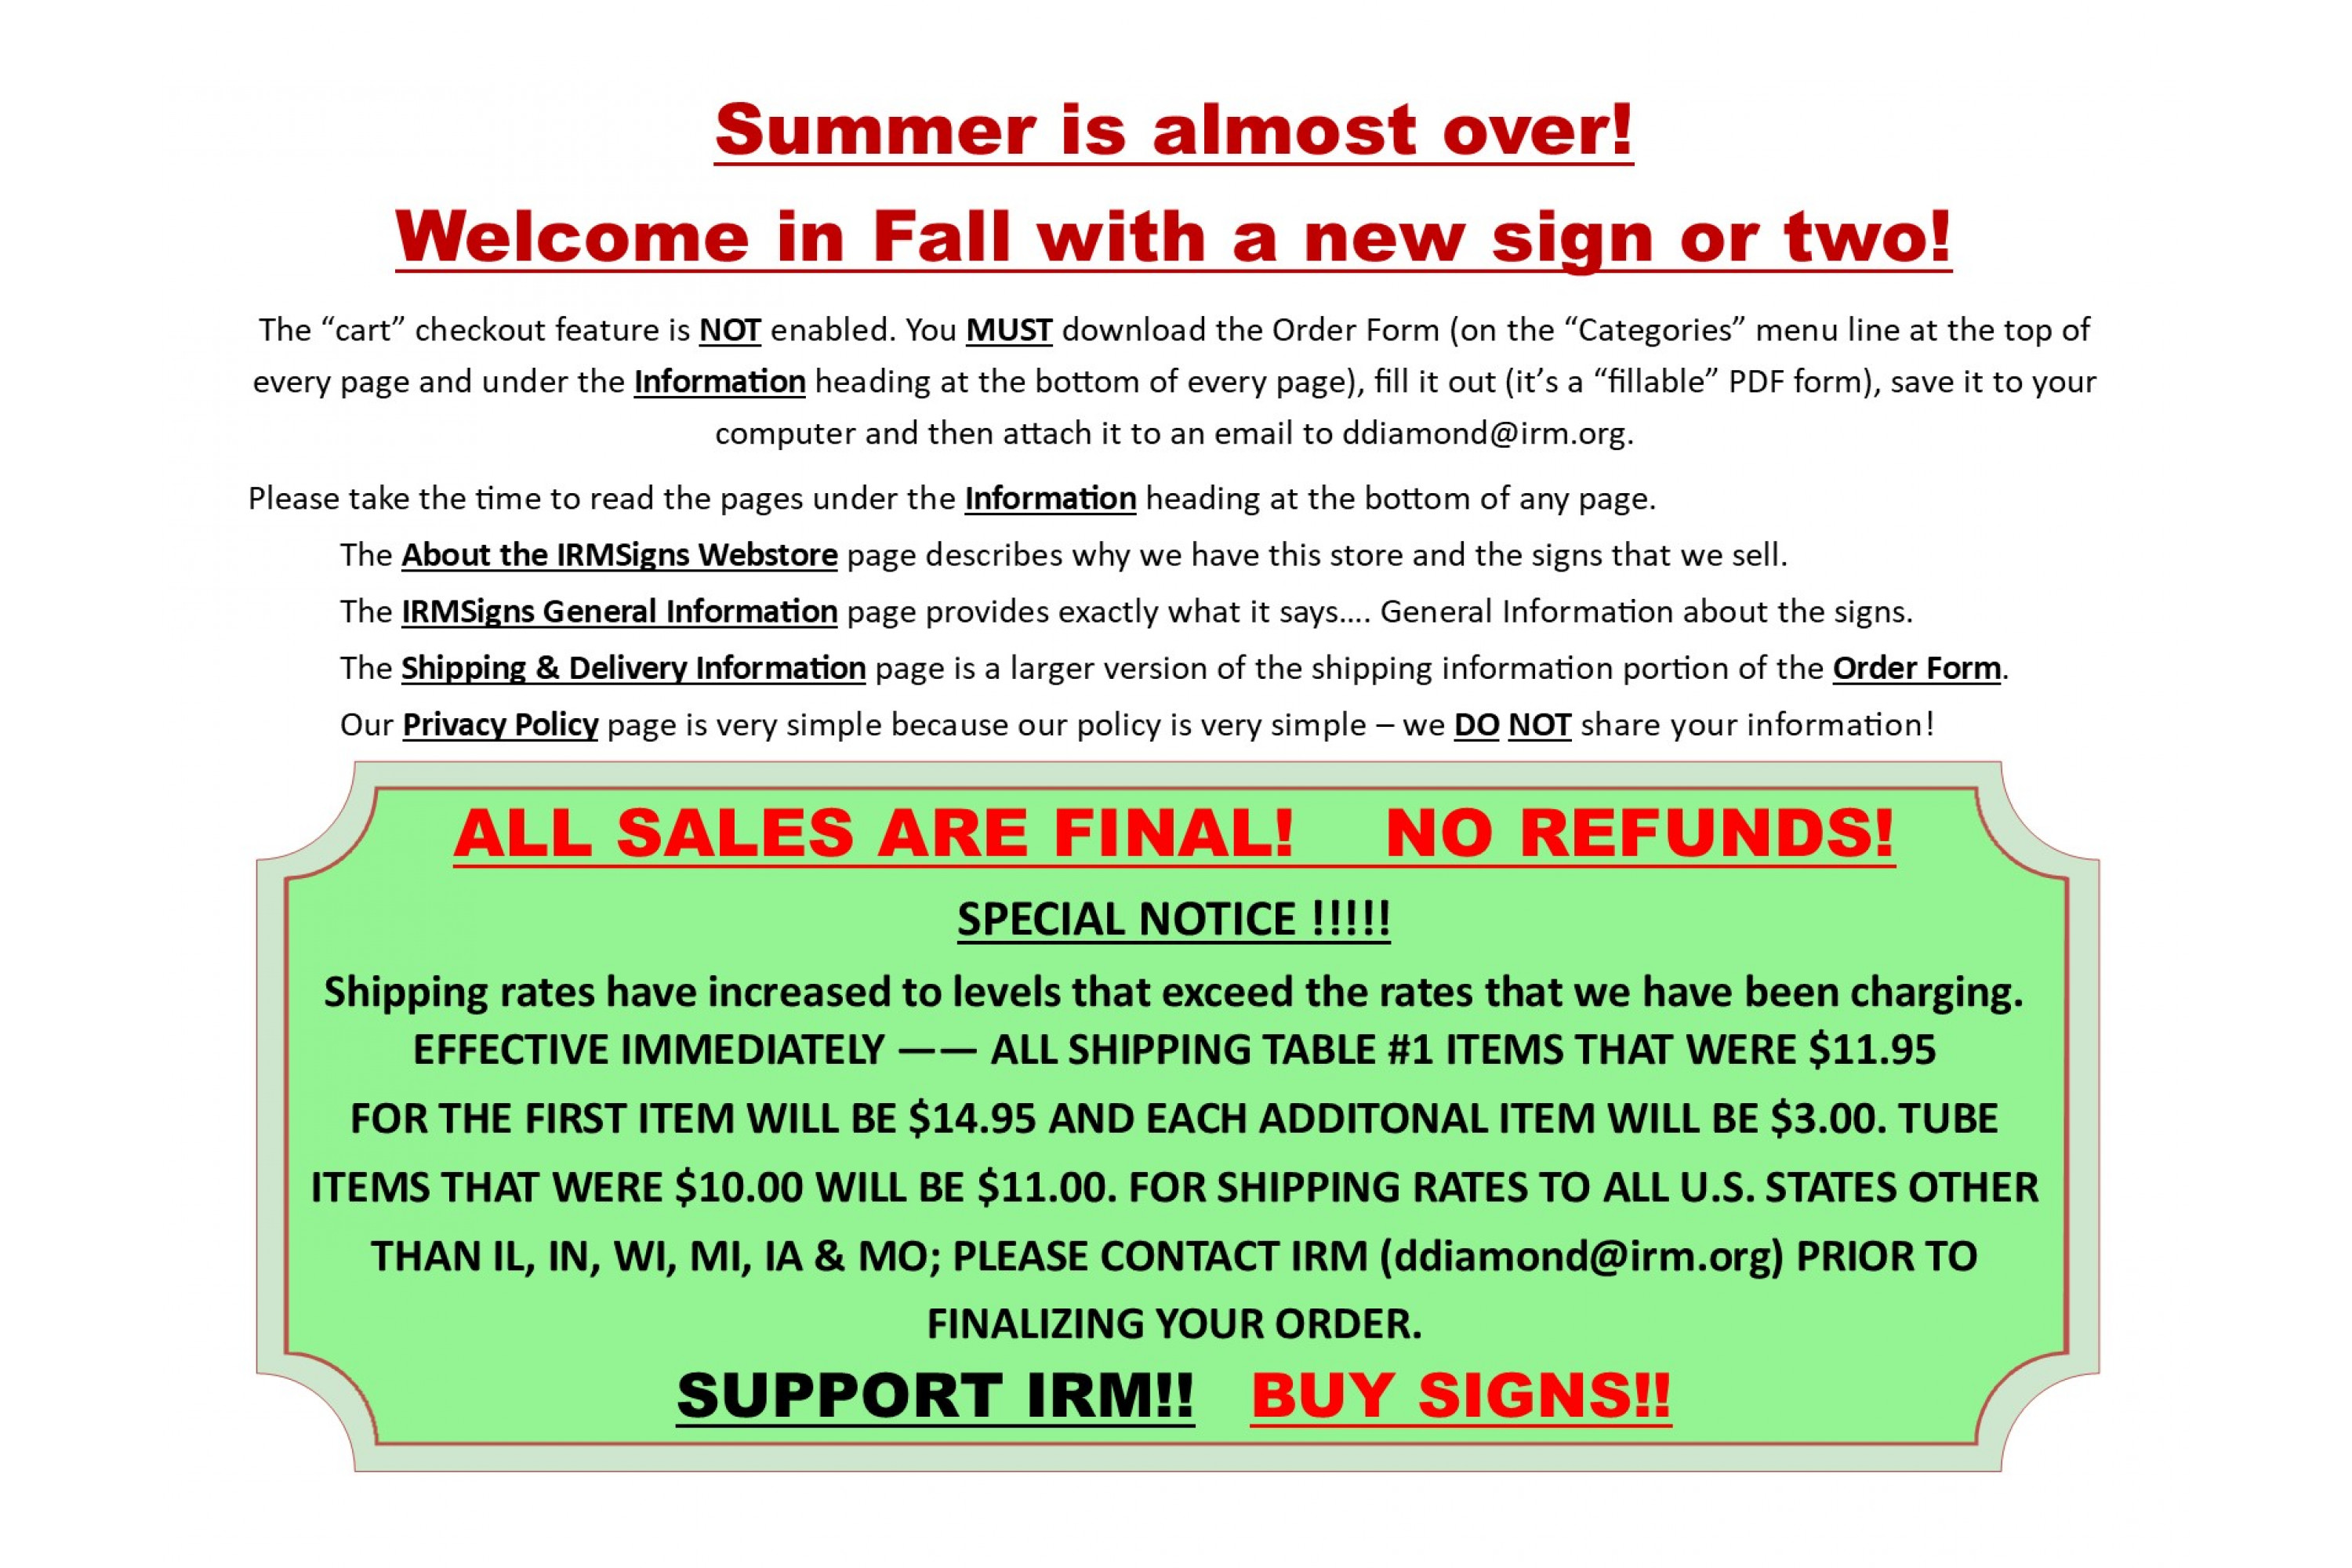 20220817 NO Refunds + Summer over - Shipping rate changes